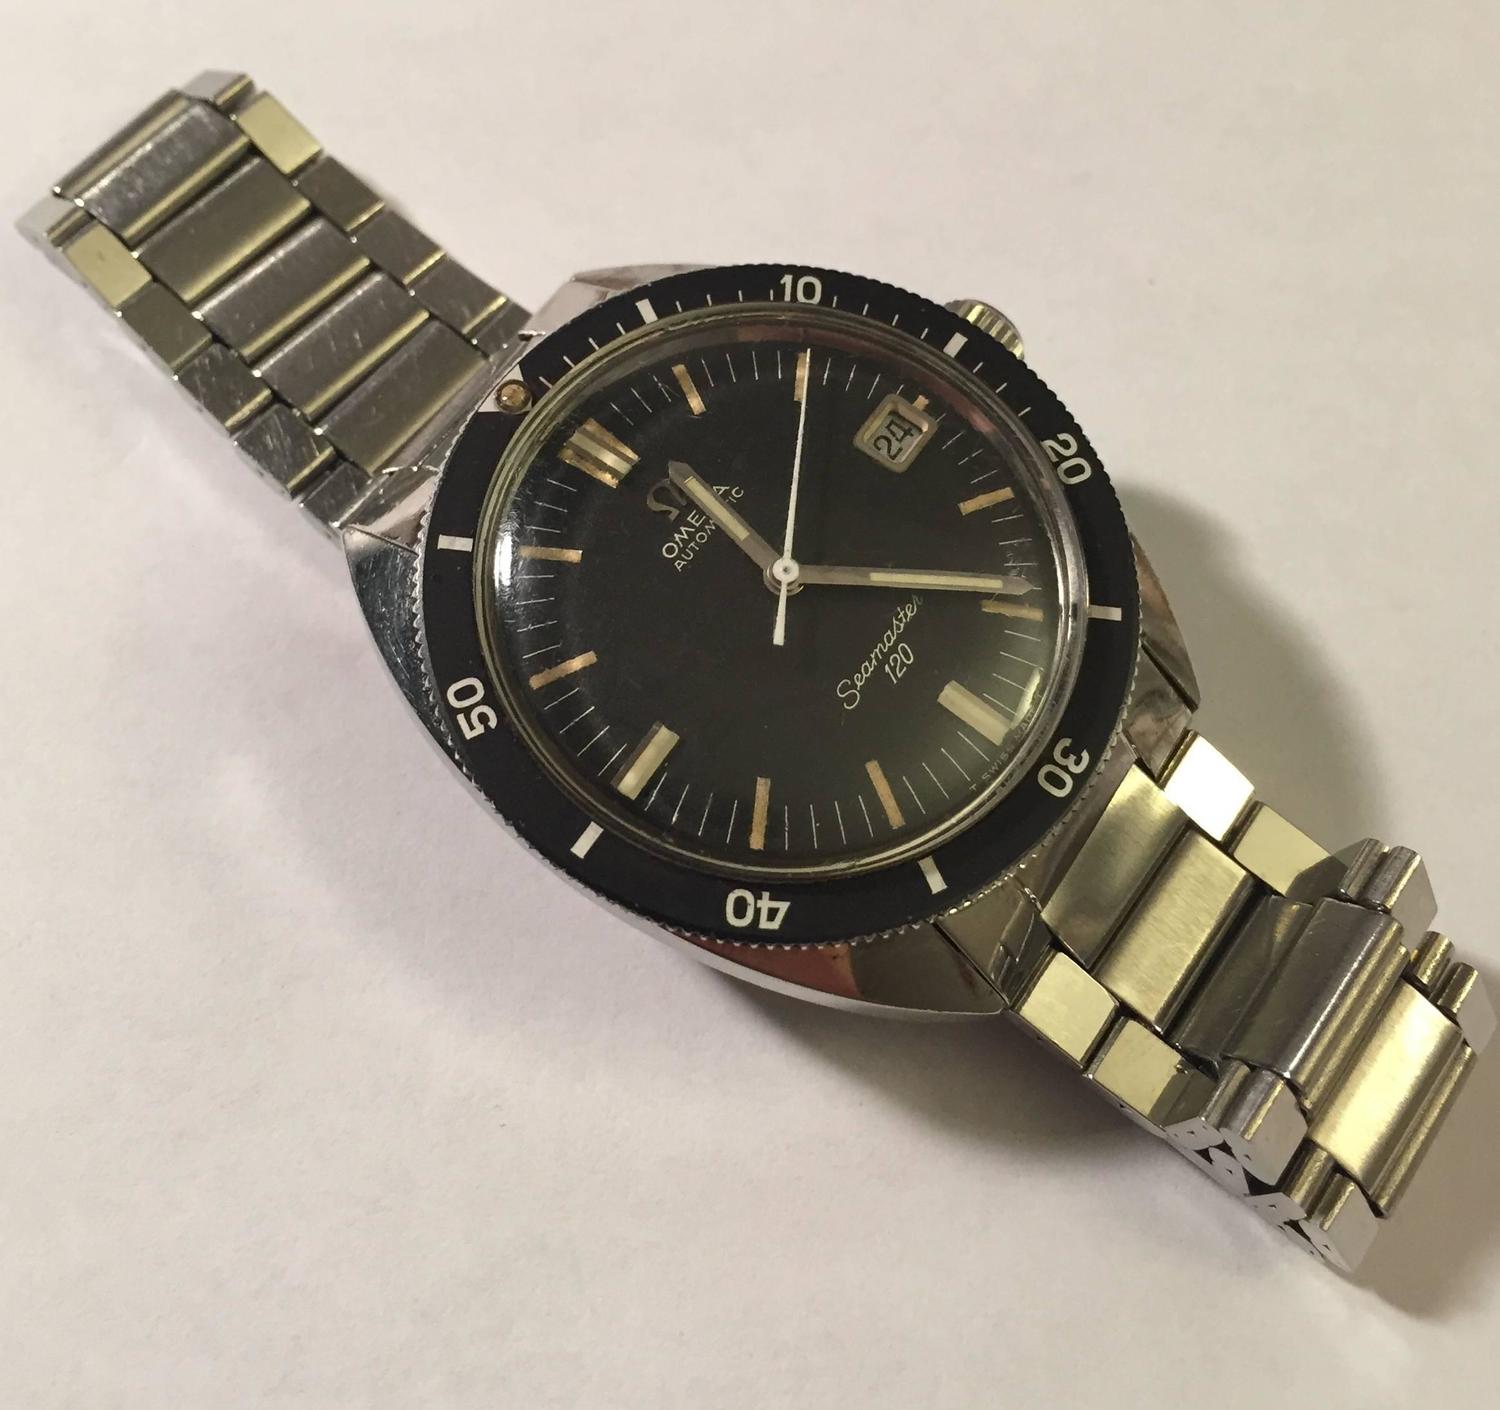 Vintage 196039;s Omega Seamaster 120 Automatic Watch at 1stdibs